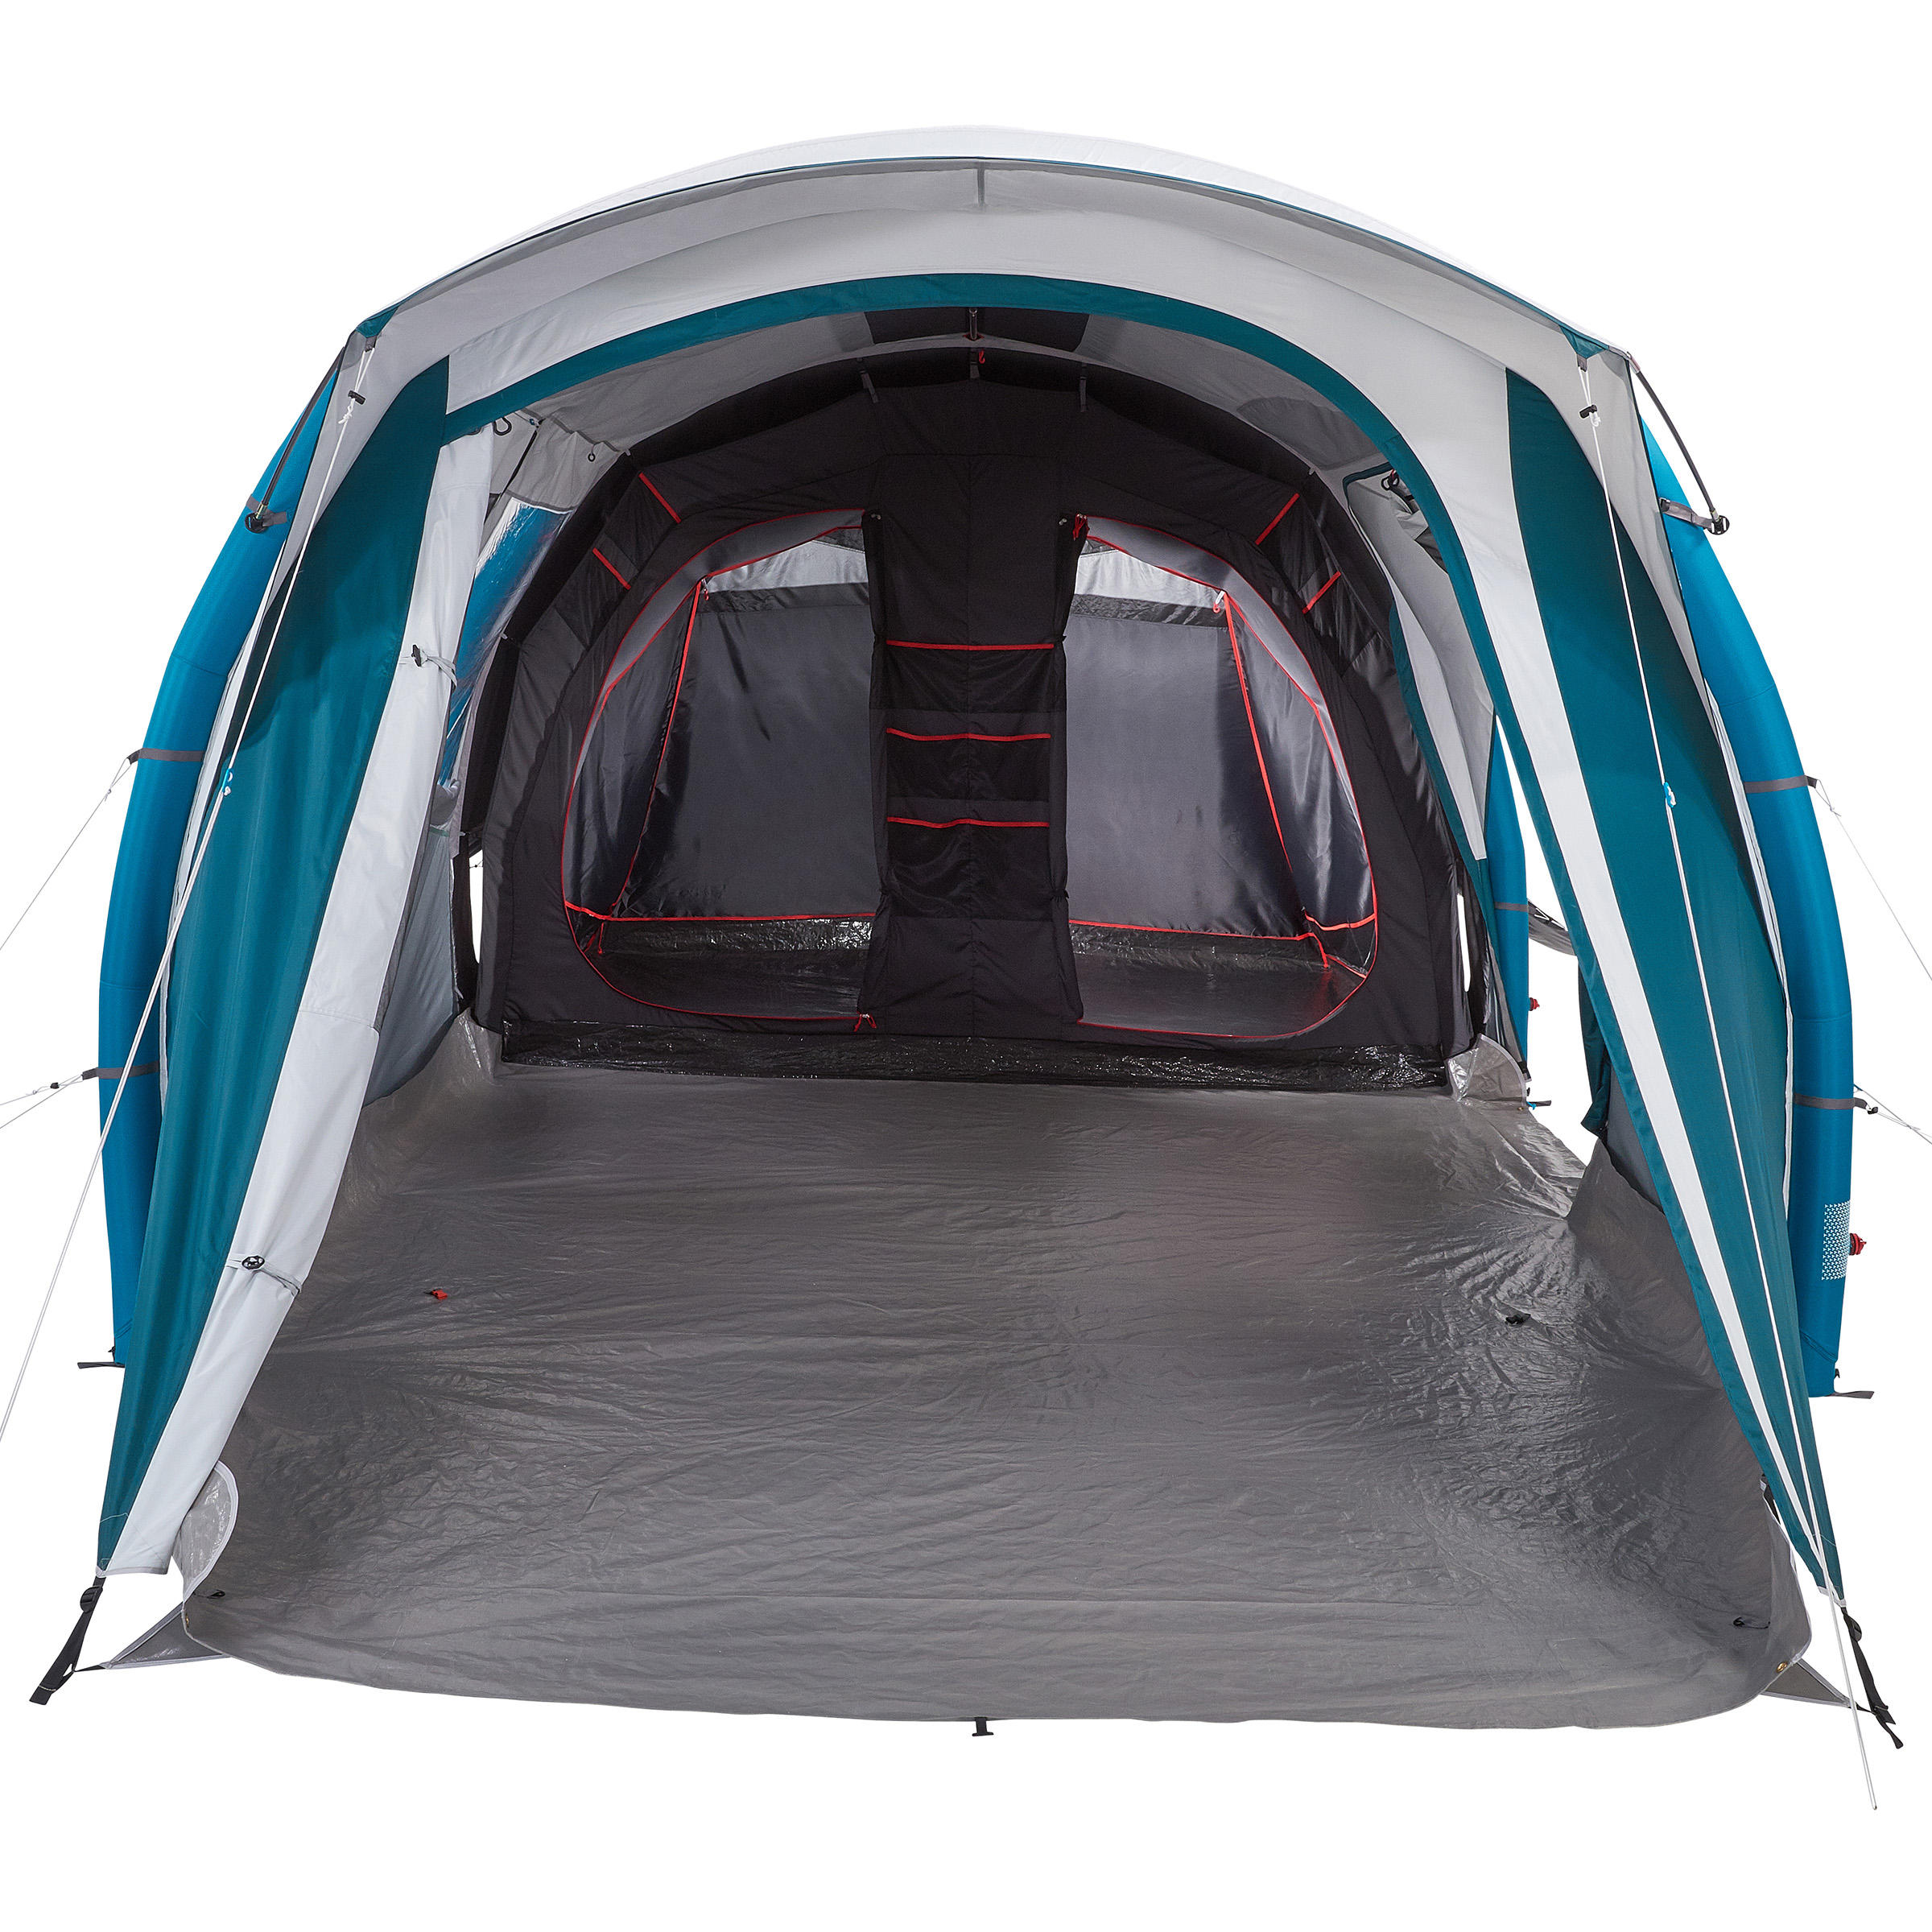 QUECHUA BEDROOM AND GROUNDSHEET - SPARE PART FOR THE AIR SECONDS 6.3 F&B TENT